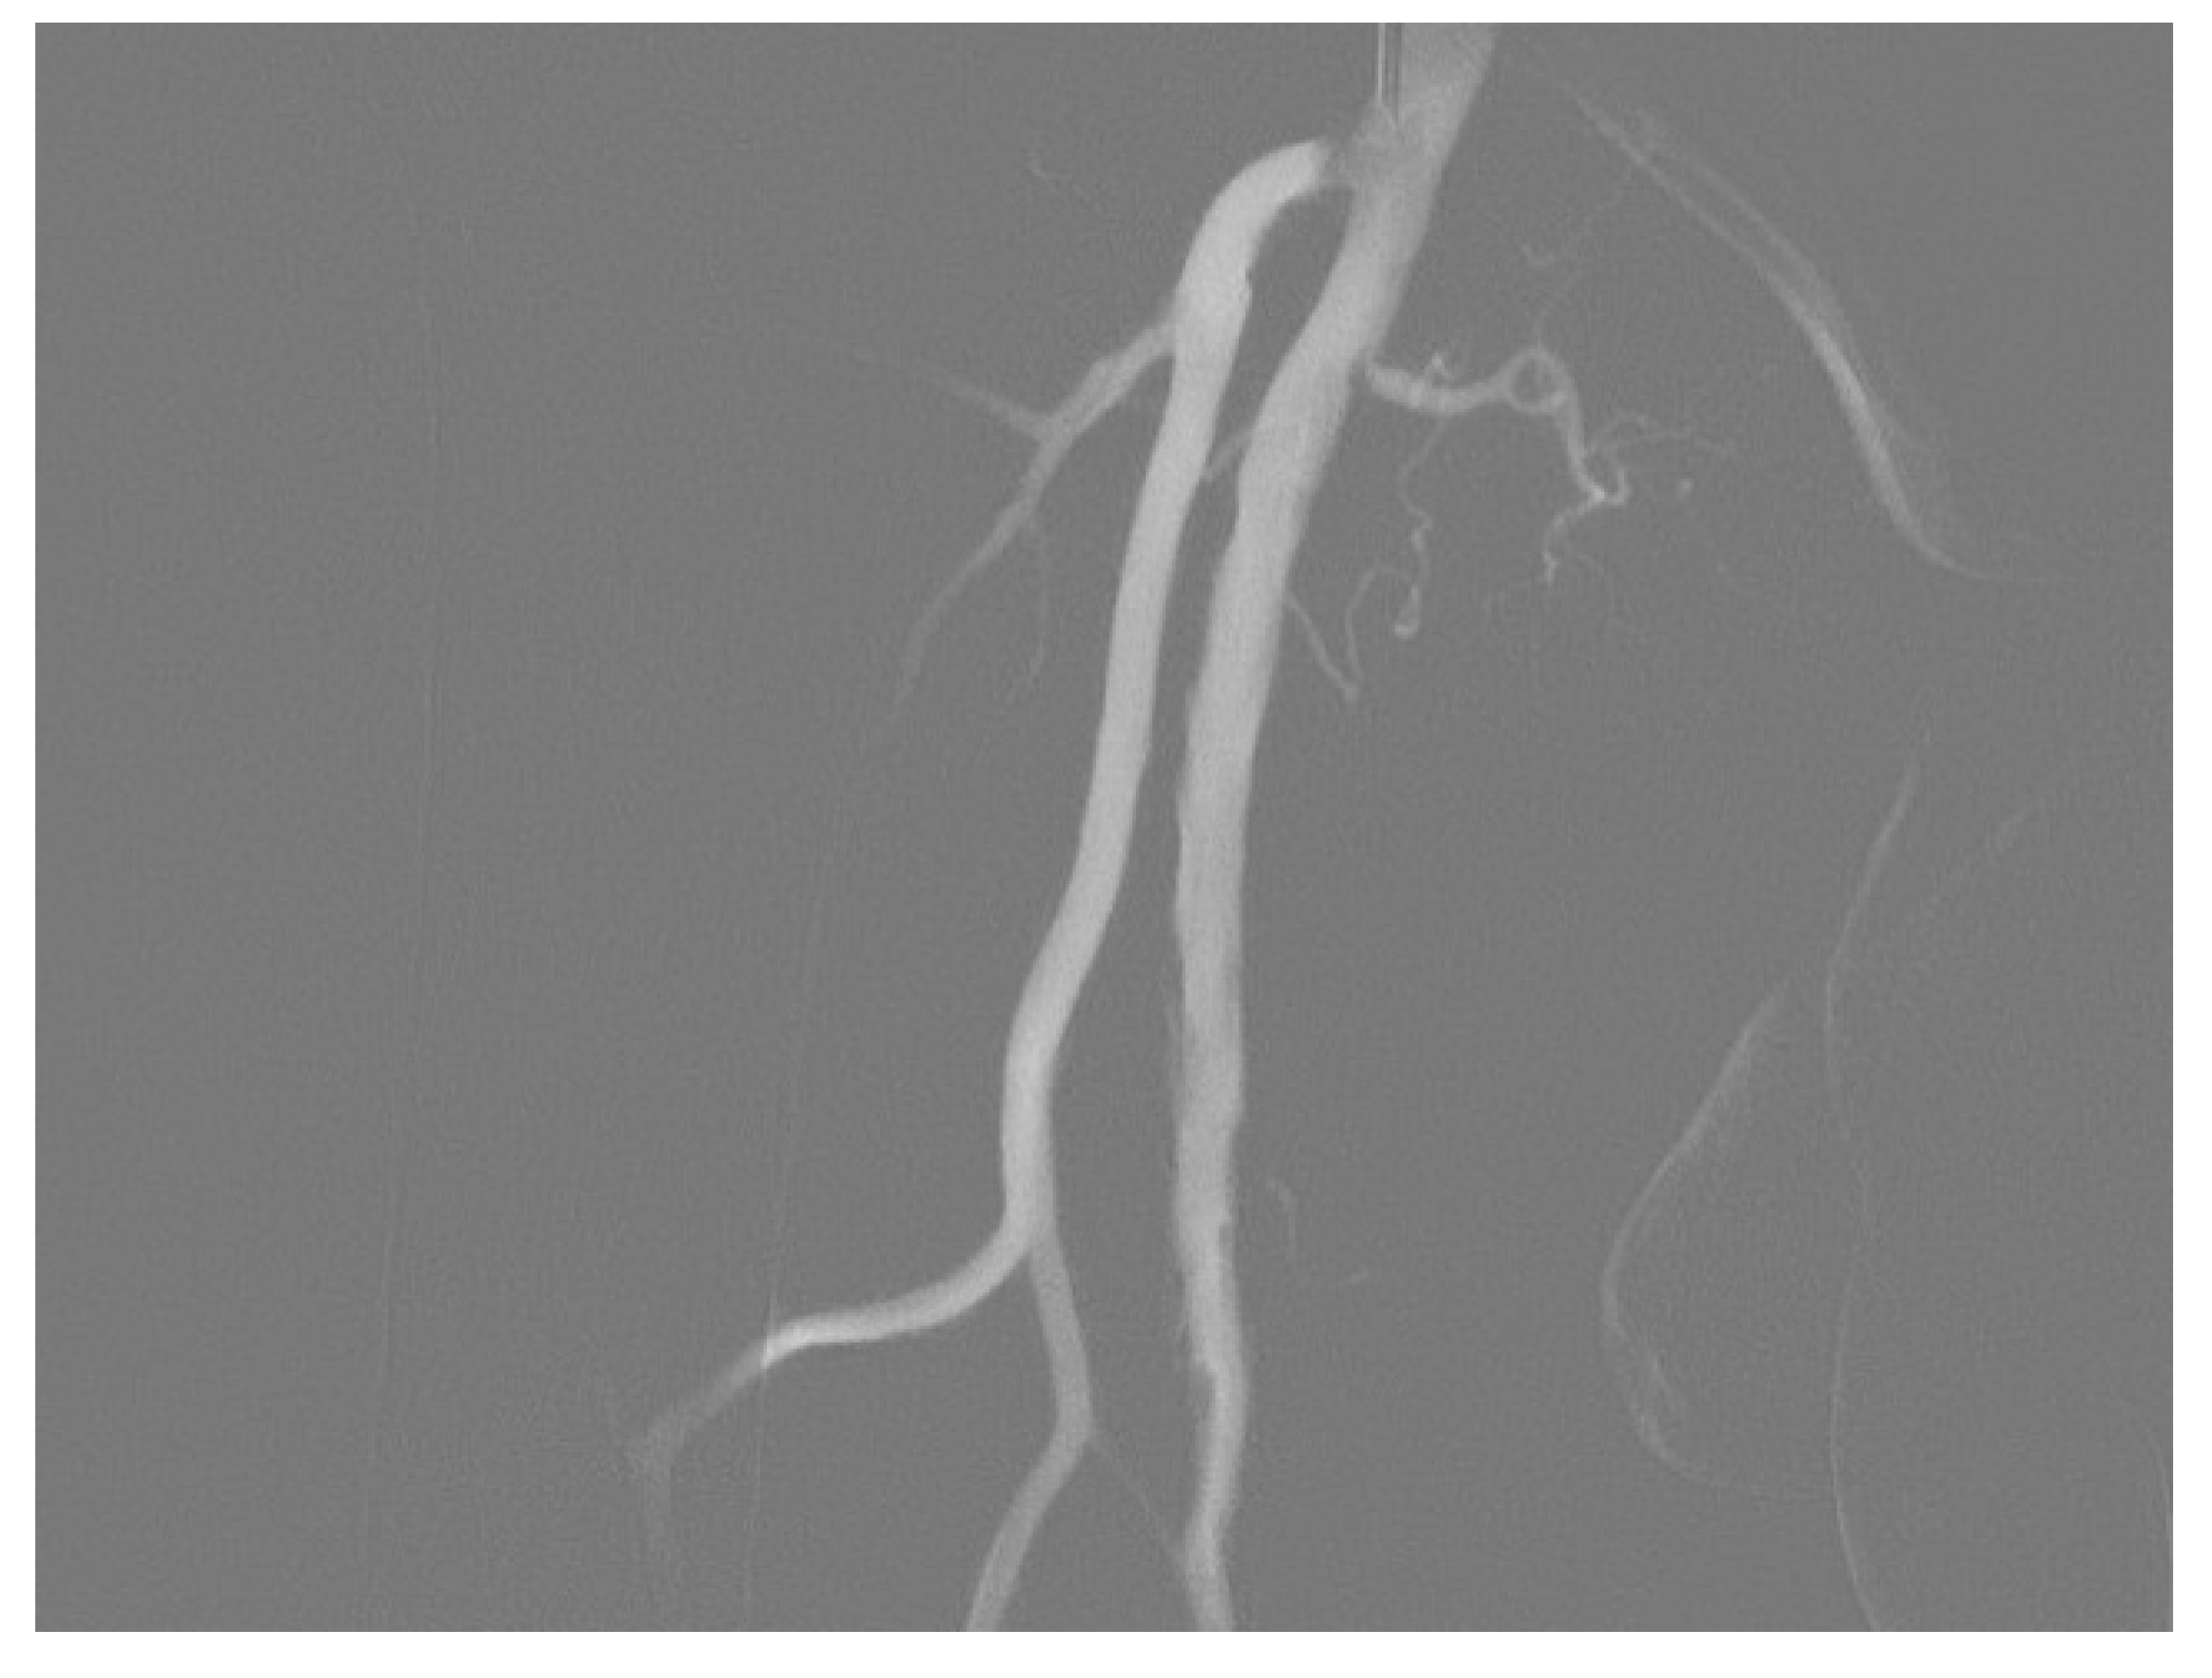 Radiation | Free Full-Text | Digital Angiography (DSA) Technical and Diagnostic Aspects in the Study of Lower Limb Arteries